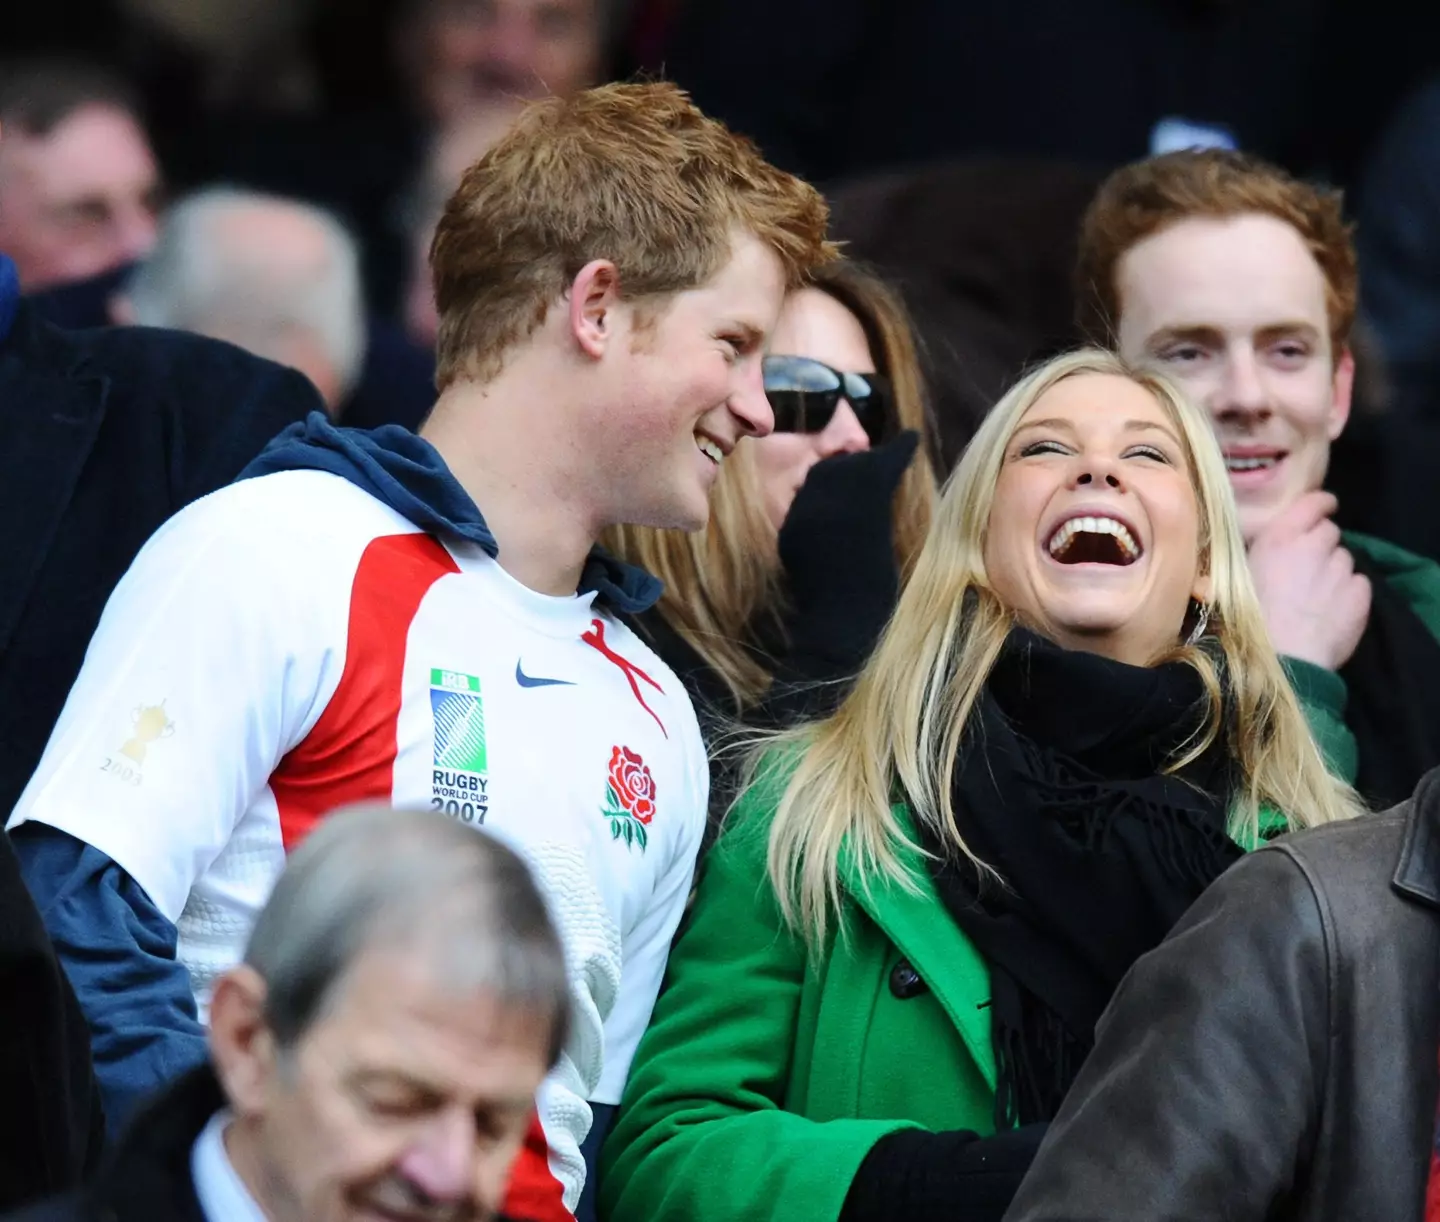 Prince Harry and Chelsy Davy were in an on-off relationship between 2004 and 2010.